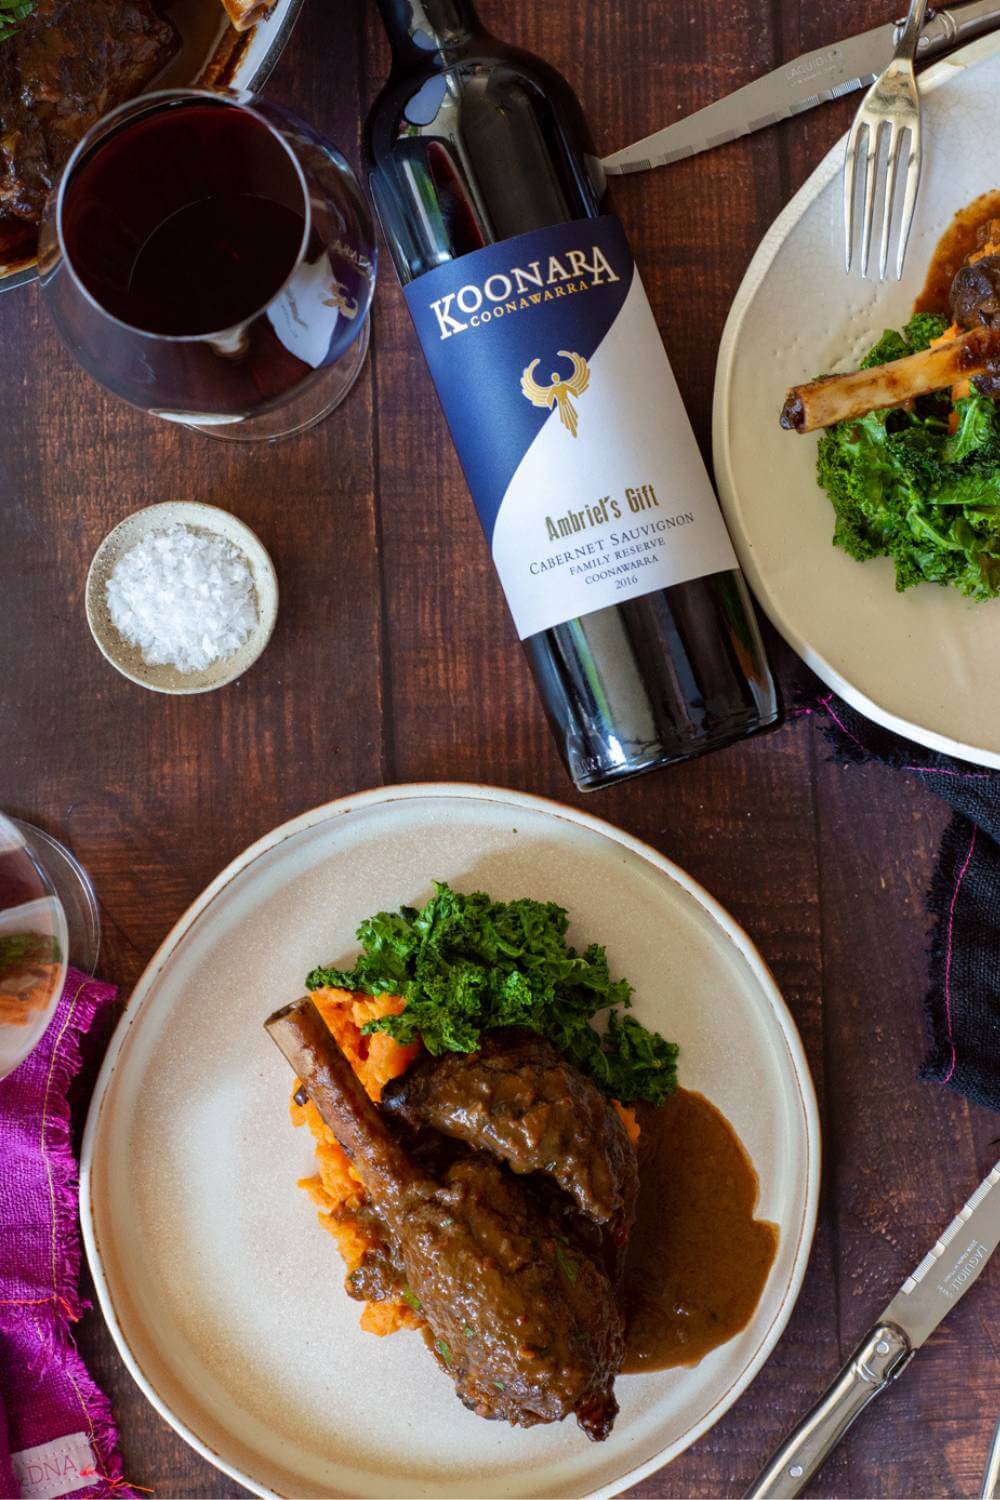 Red Wine and Chocolate Lamb Shanks with our Ambriel's Gift Cabernet Sauvignon